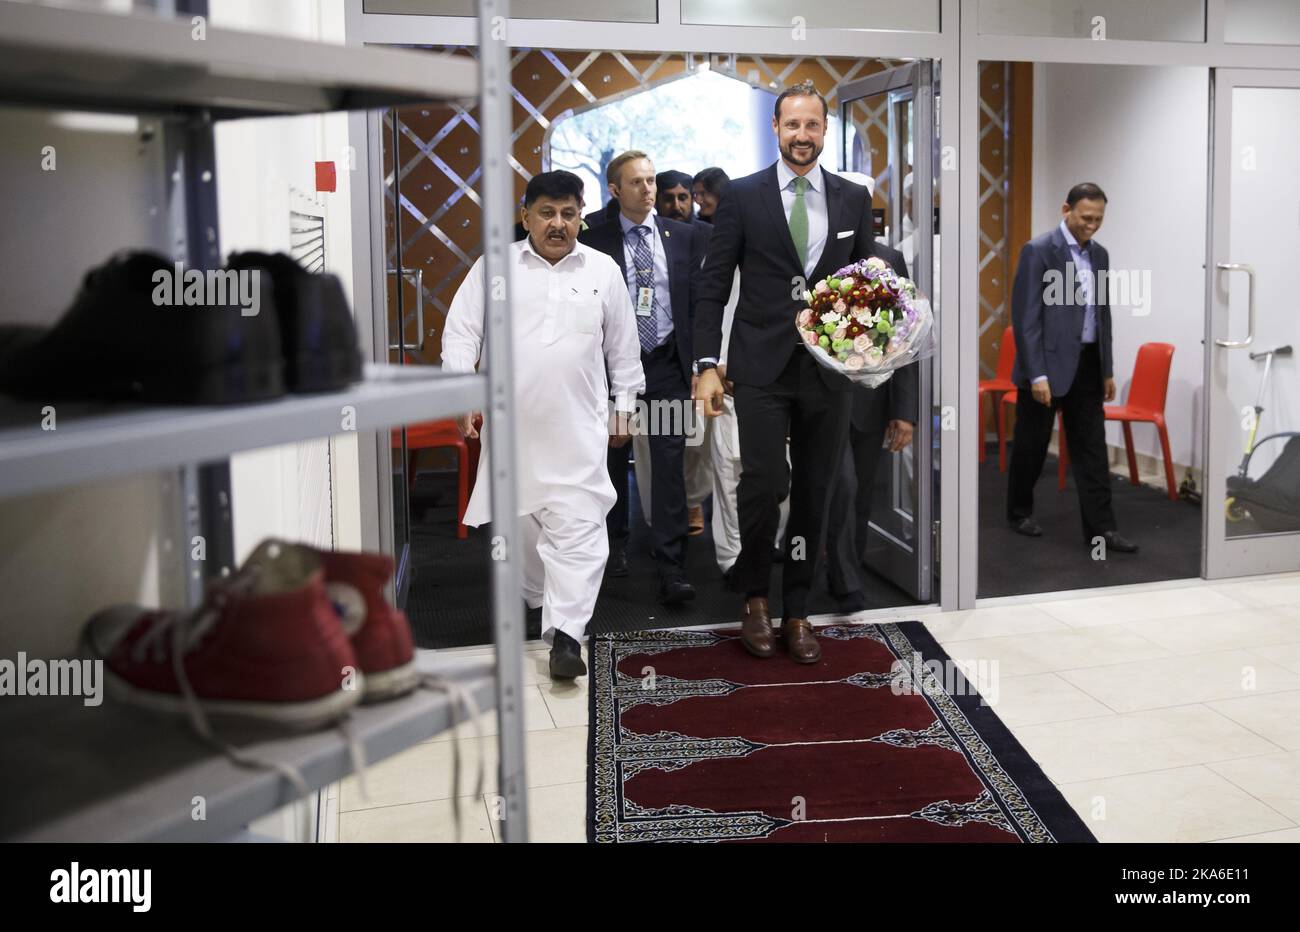 OSLO, Norway 20150918. Crown Prince Haakon visits Central Jamaat-e Ahl-e Sunnat mosques in Groenland in Oslo Friday. On that occasion opens the Crown Prince a conference for young religious and ethical leaders. It is 'Samarbeidsraadet for tros- og livssynssamfunn' who is organizing the conference. Conspiracy thinking, leadership training and the prevention of violent extremism are among the topics. Mosque chairman Ghulam Sarwar shows the great hall. Photo: Heiko Junge / NTB scanpix Stock Photo